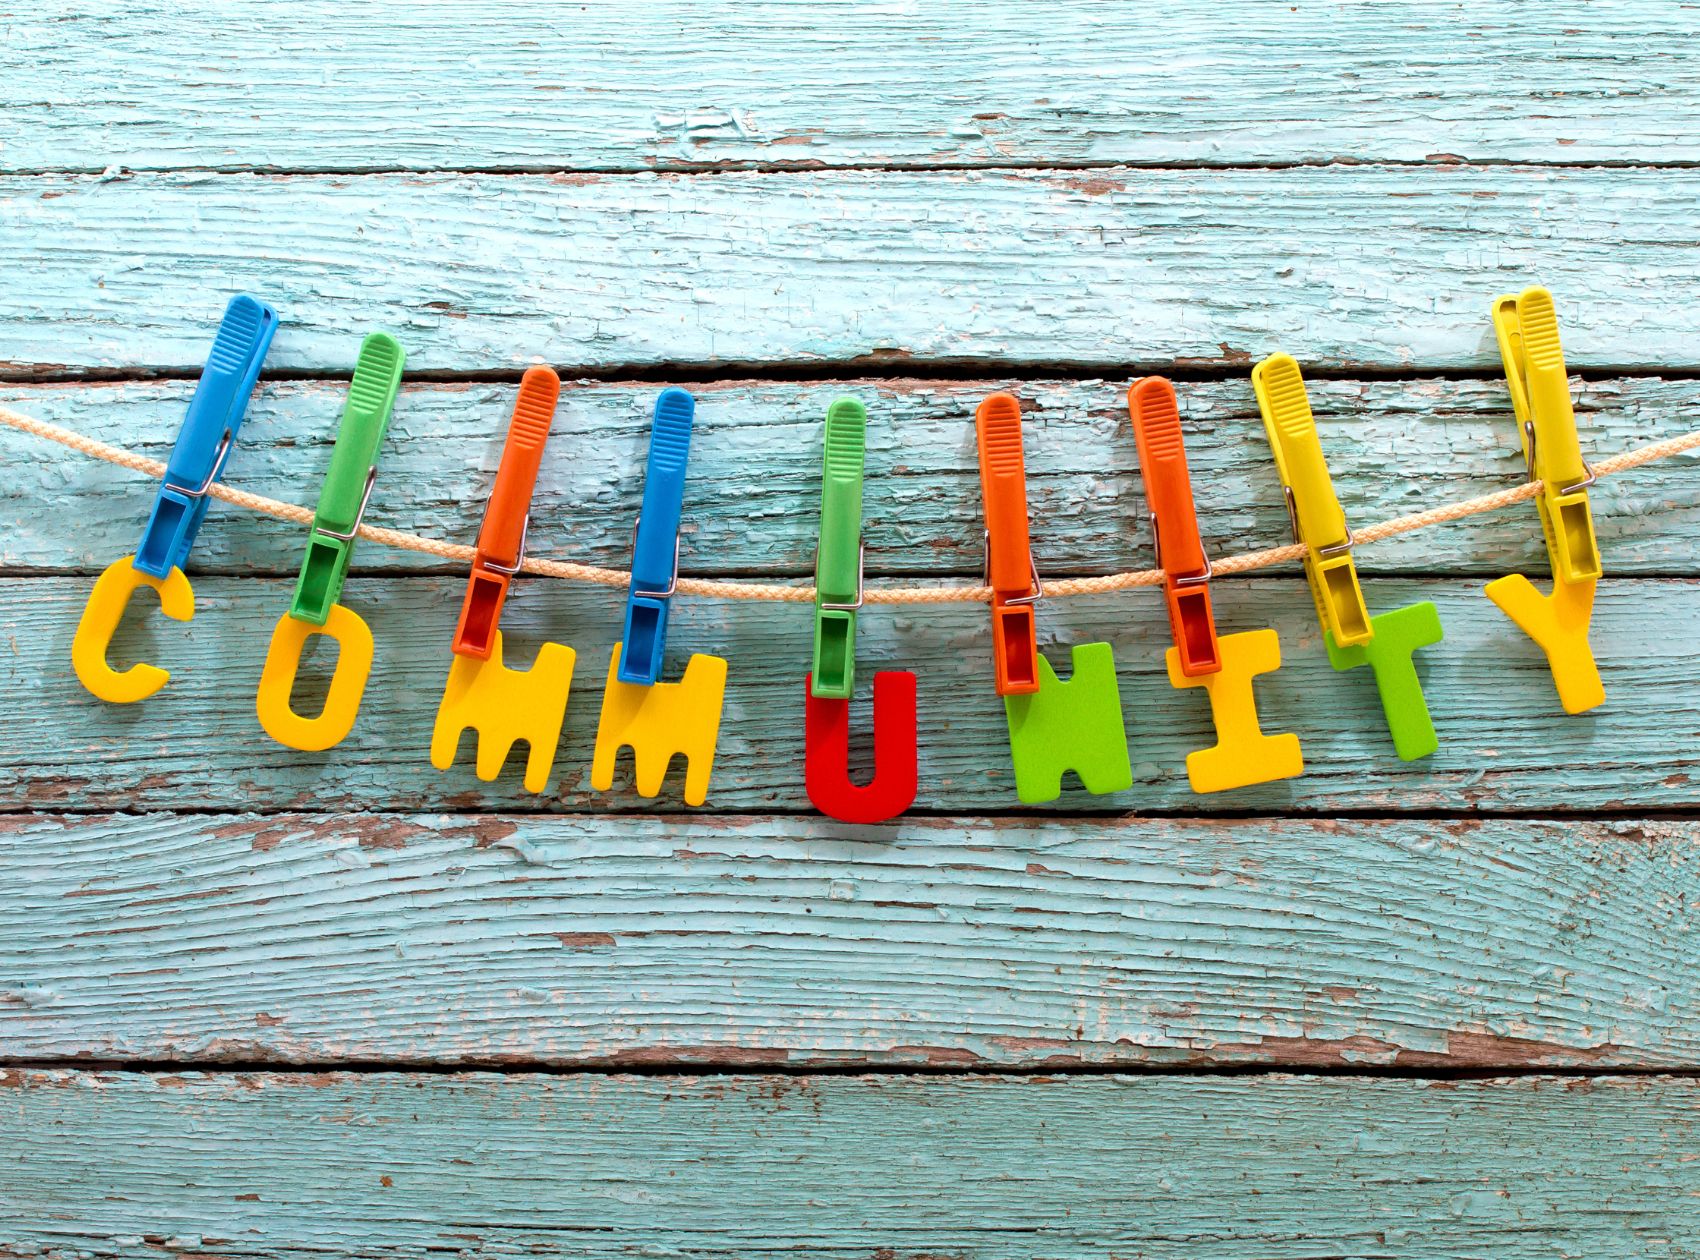 This is an image of the word "community" spelled out in colorful letters hanging by clothes pins on a clothes line.